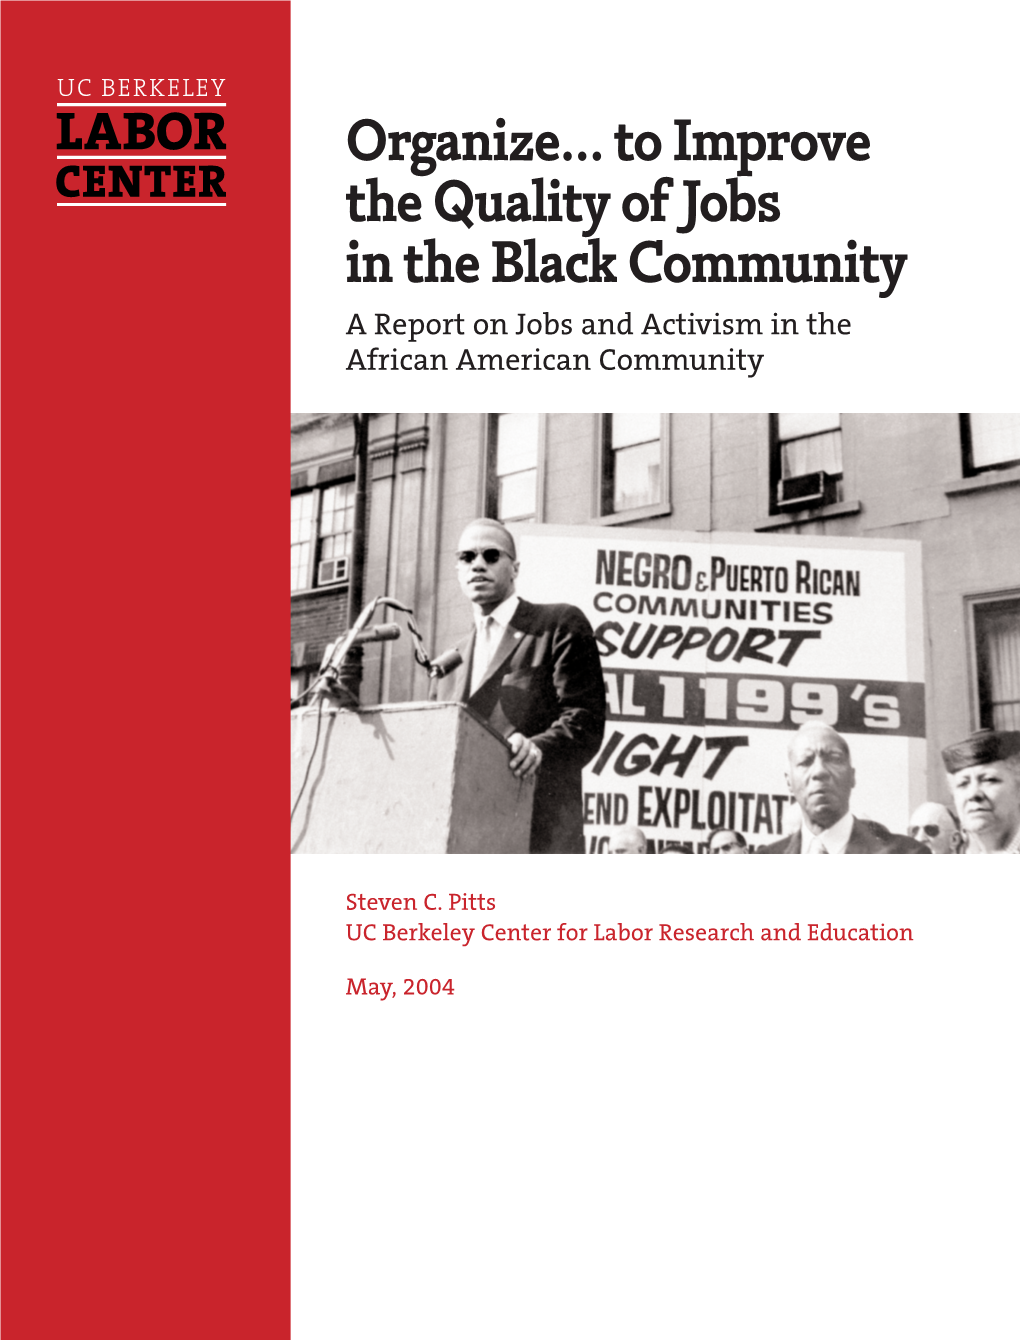 UC Berkeley Labor Center, Organizing to Improve the Quality Of